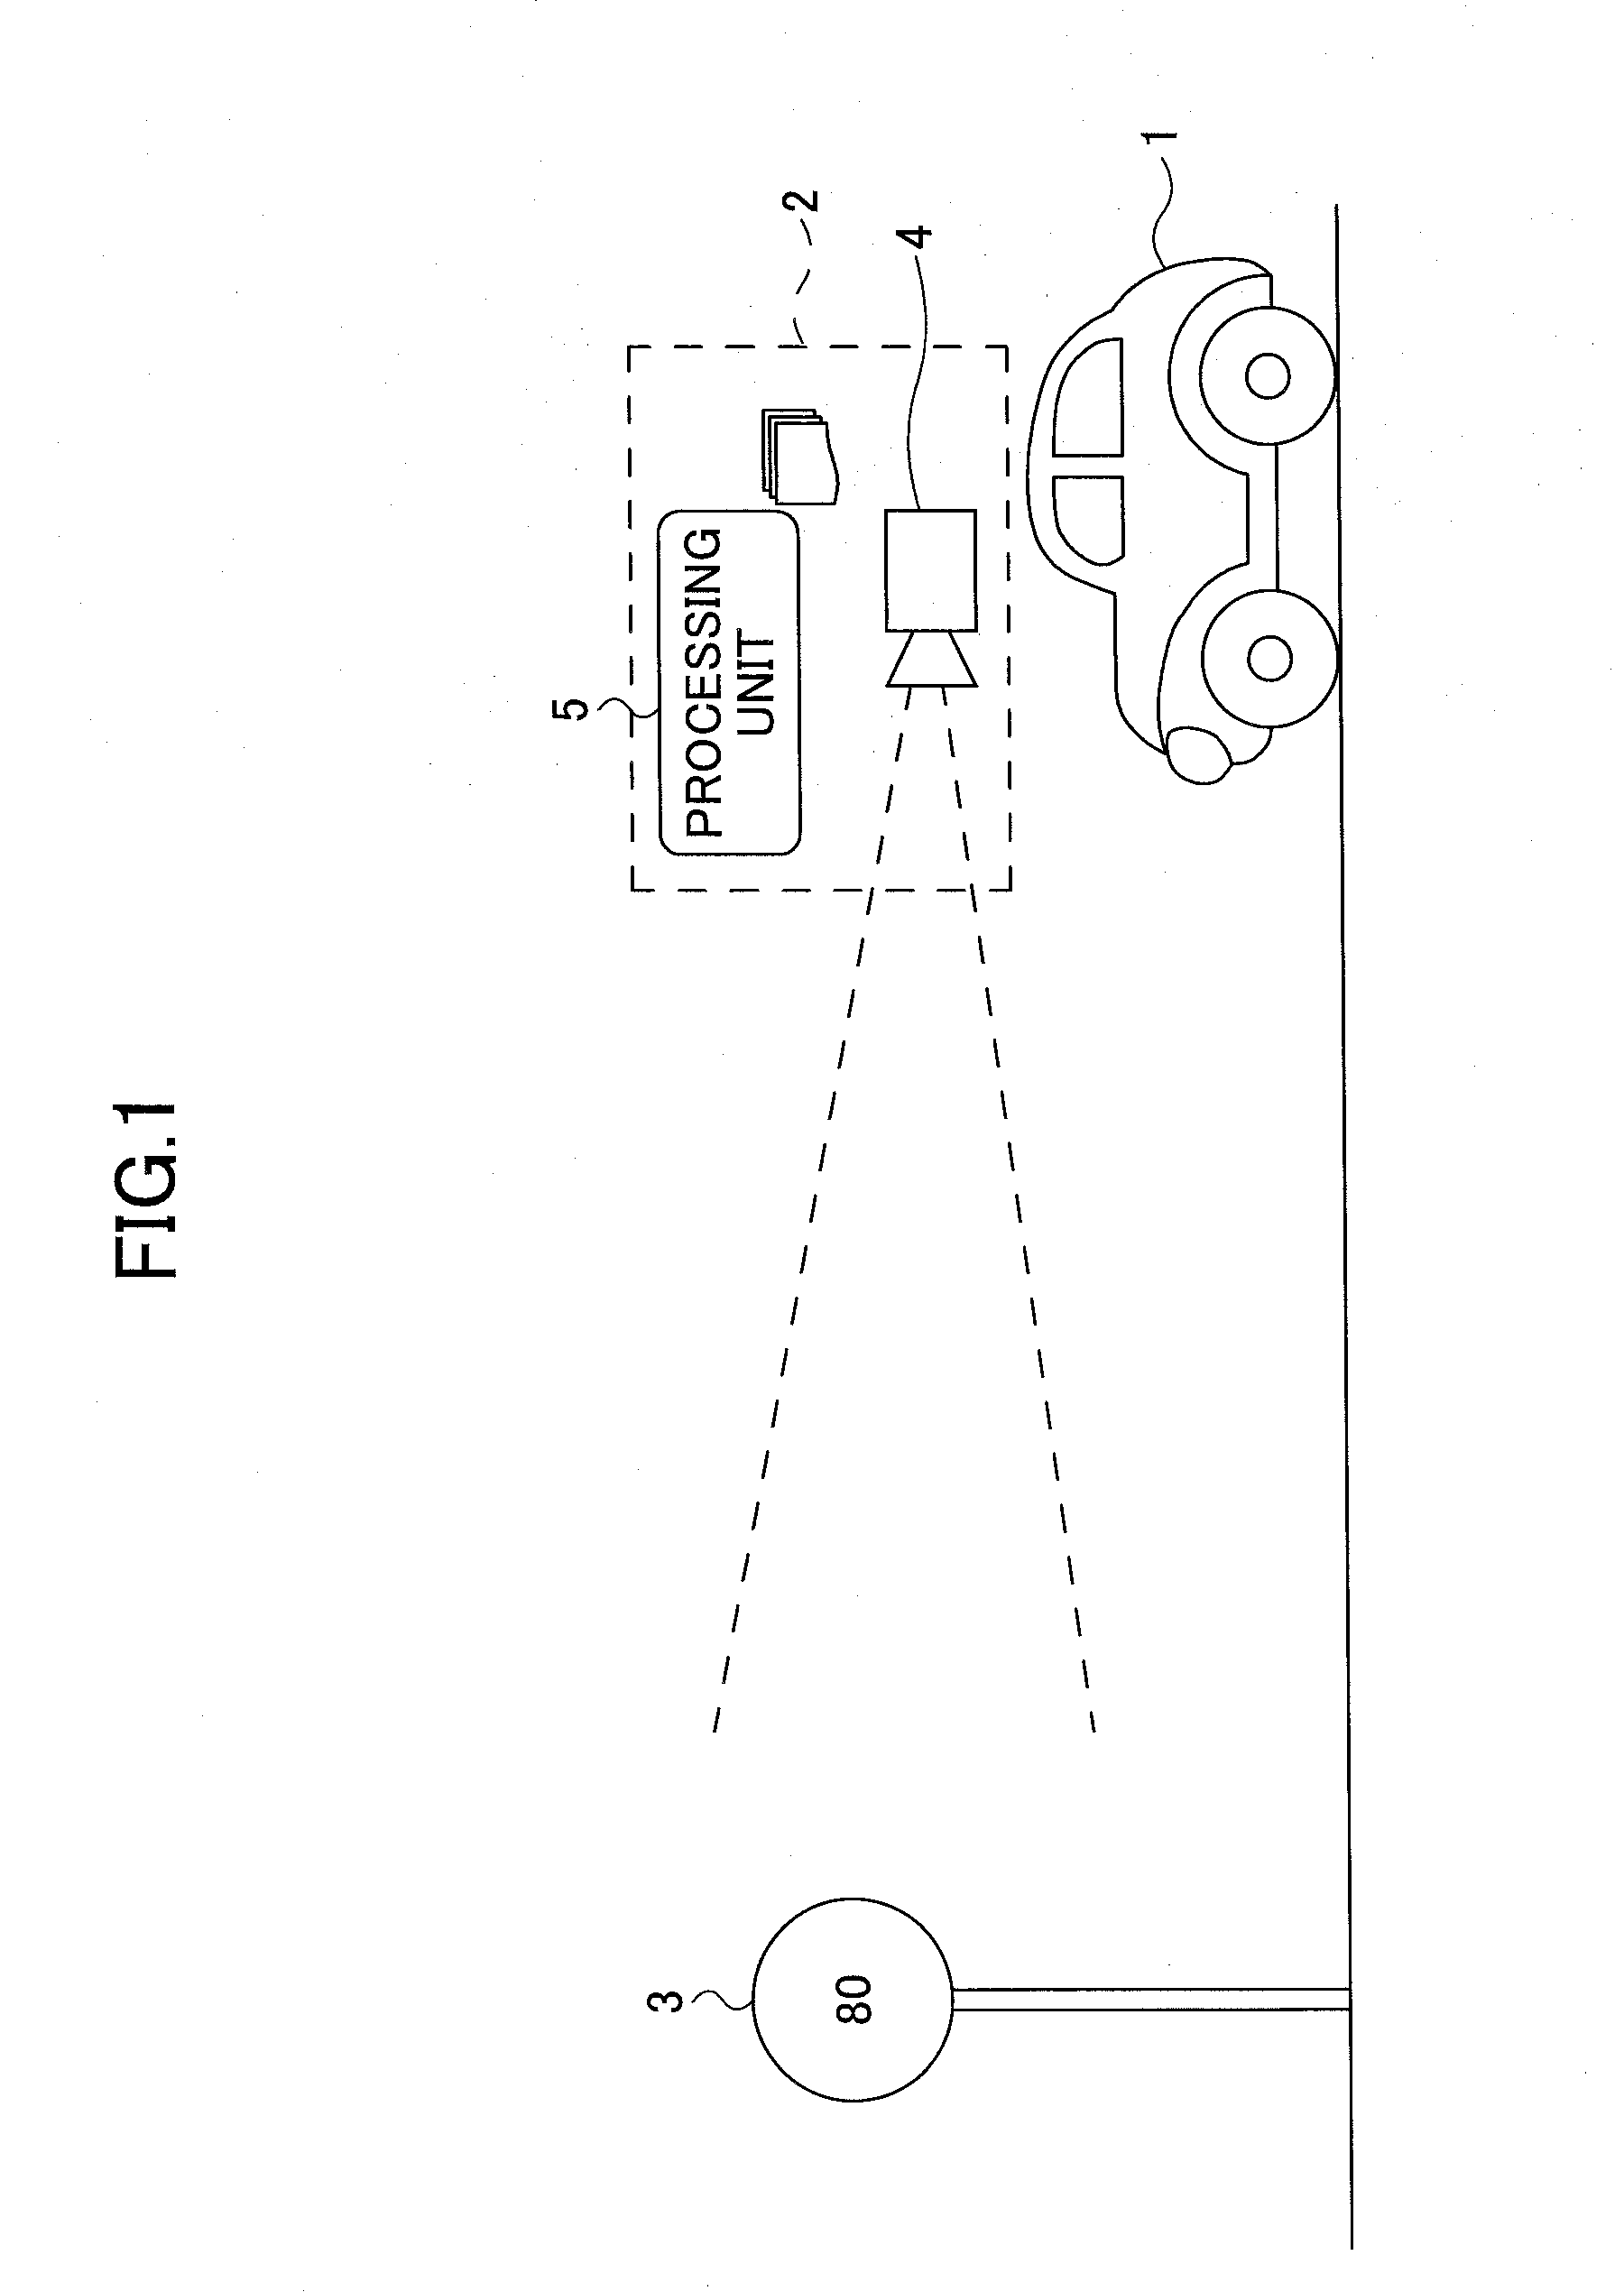 Traffic sign detecting method and traffic sign detecting device